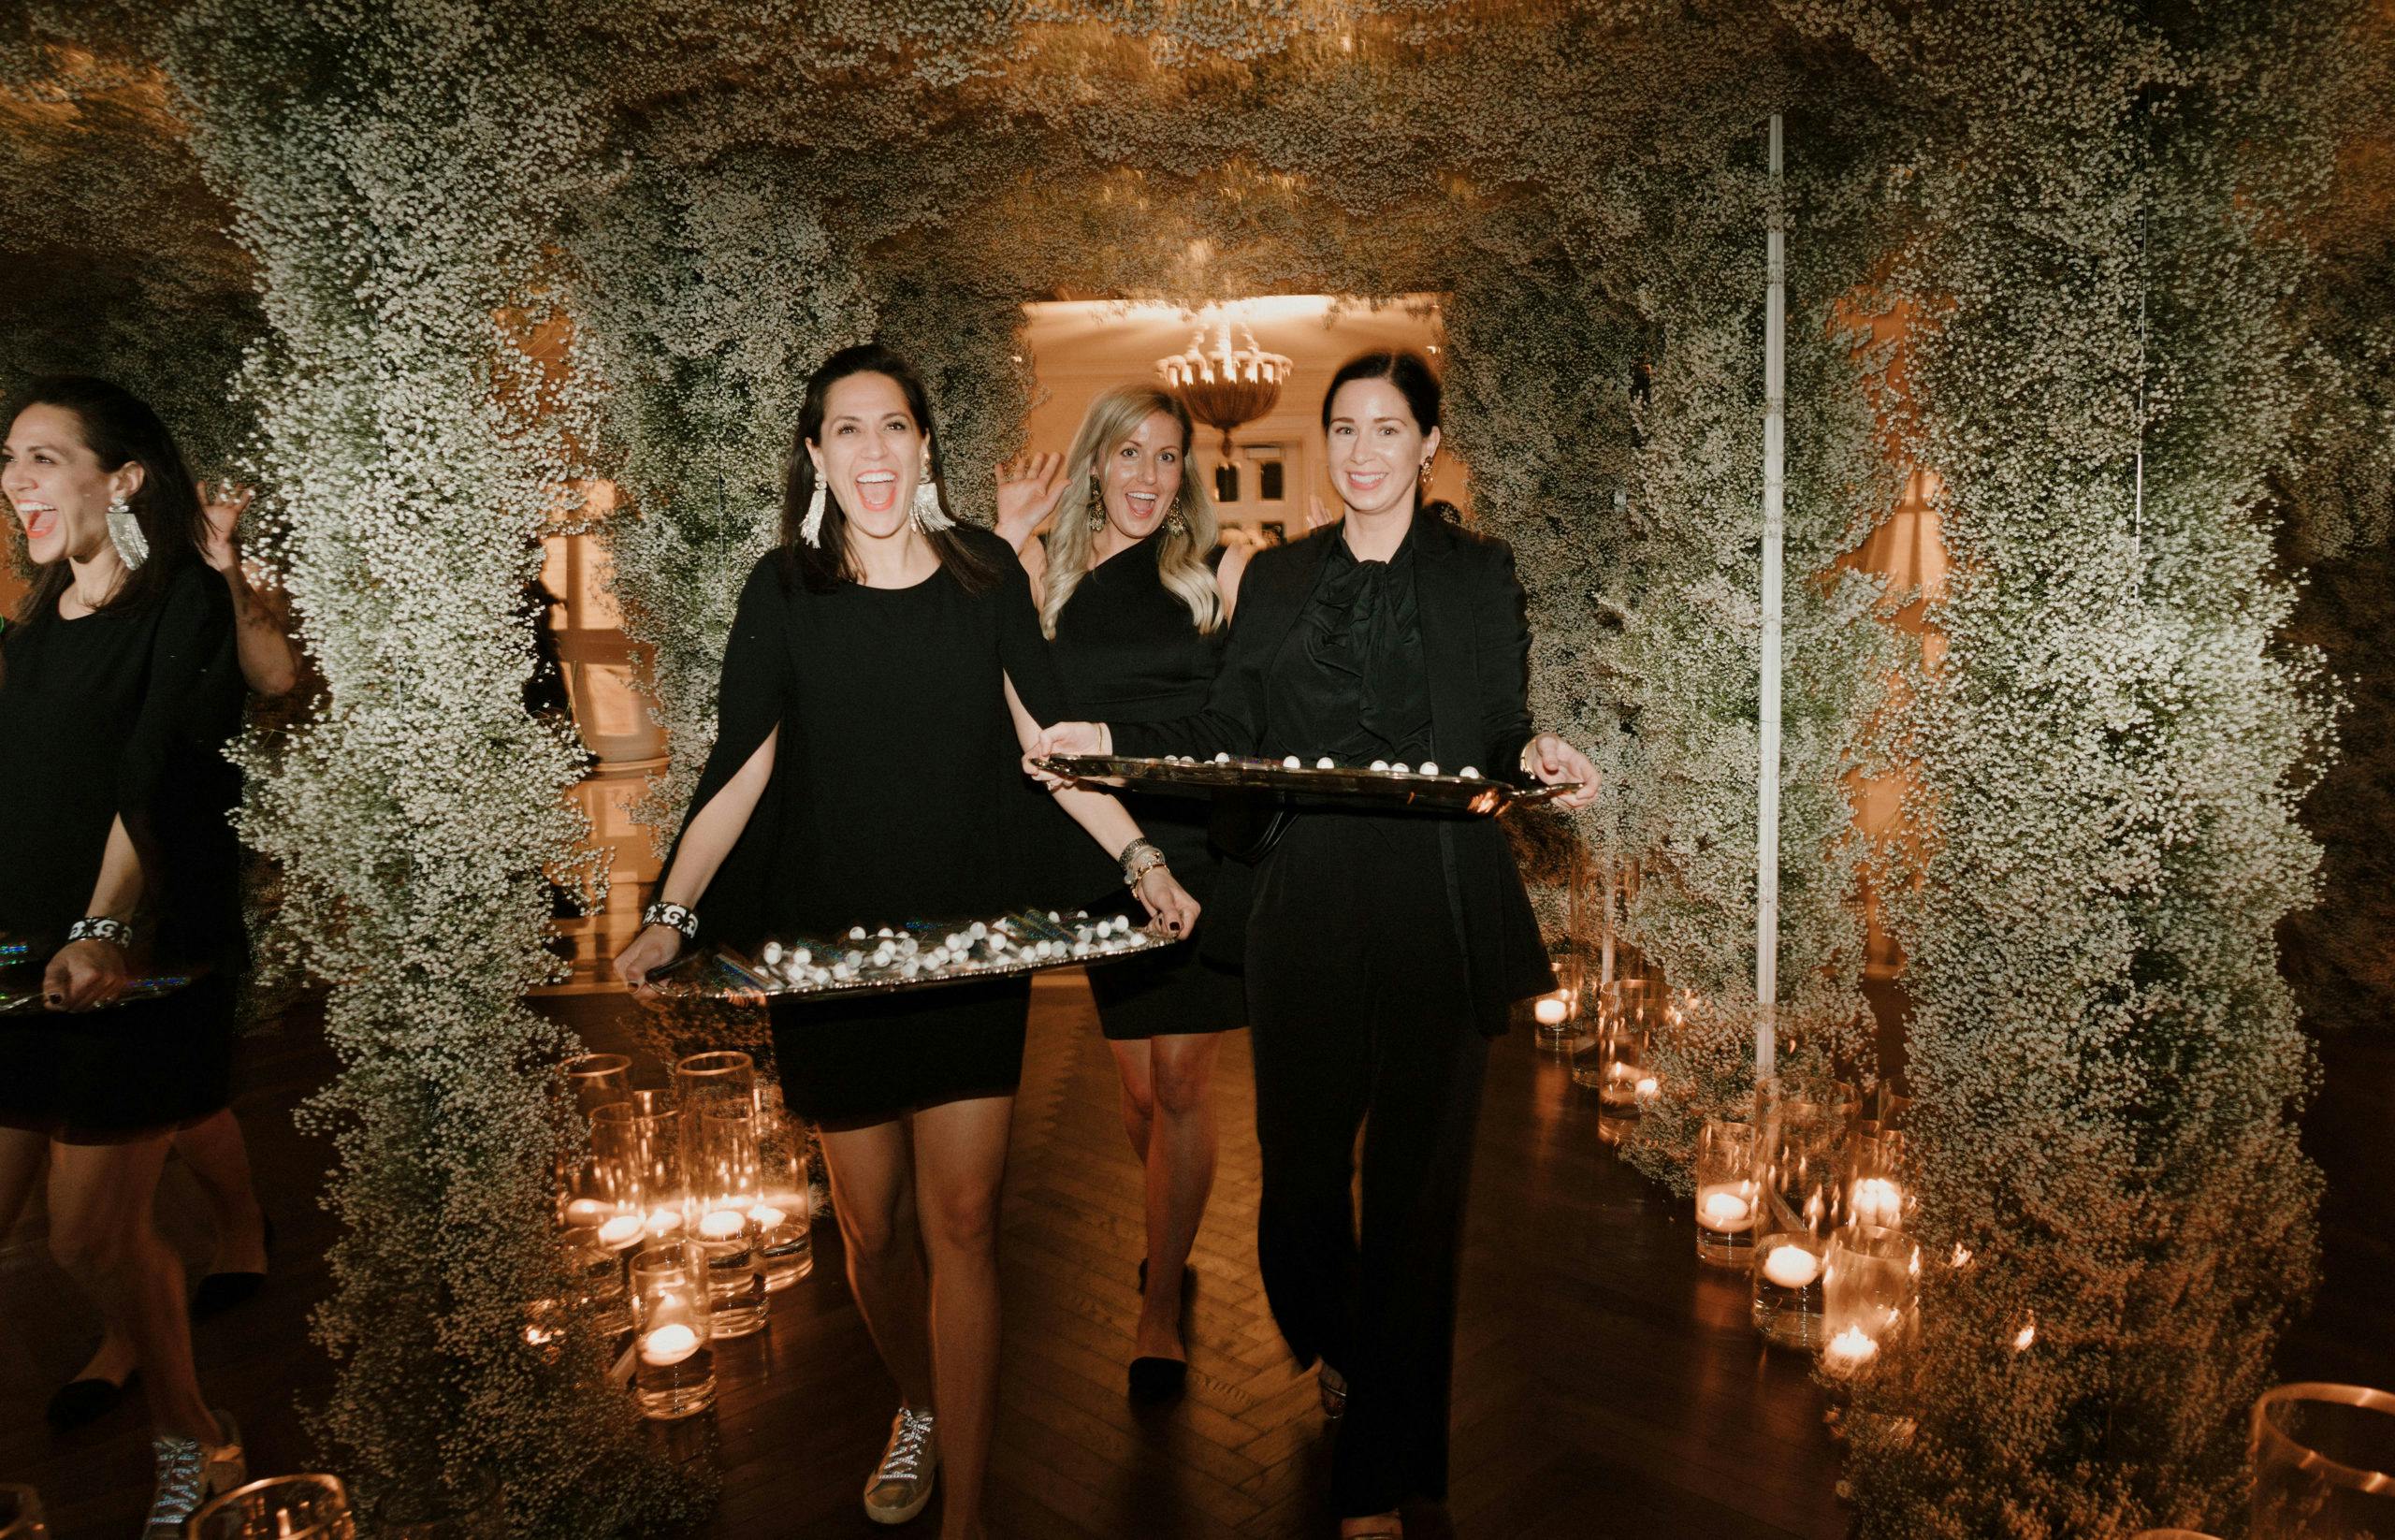 Three Wedding Staff Servers Smile Underneath Wedding Canopy Covered in Baby’s Breath